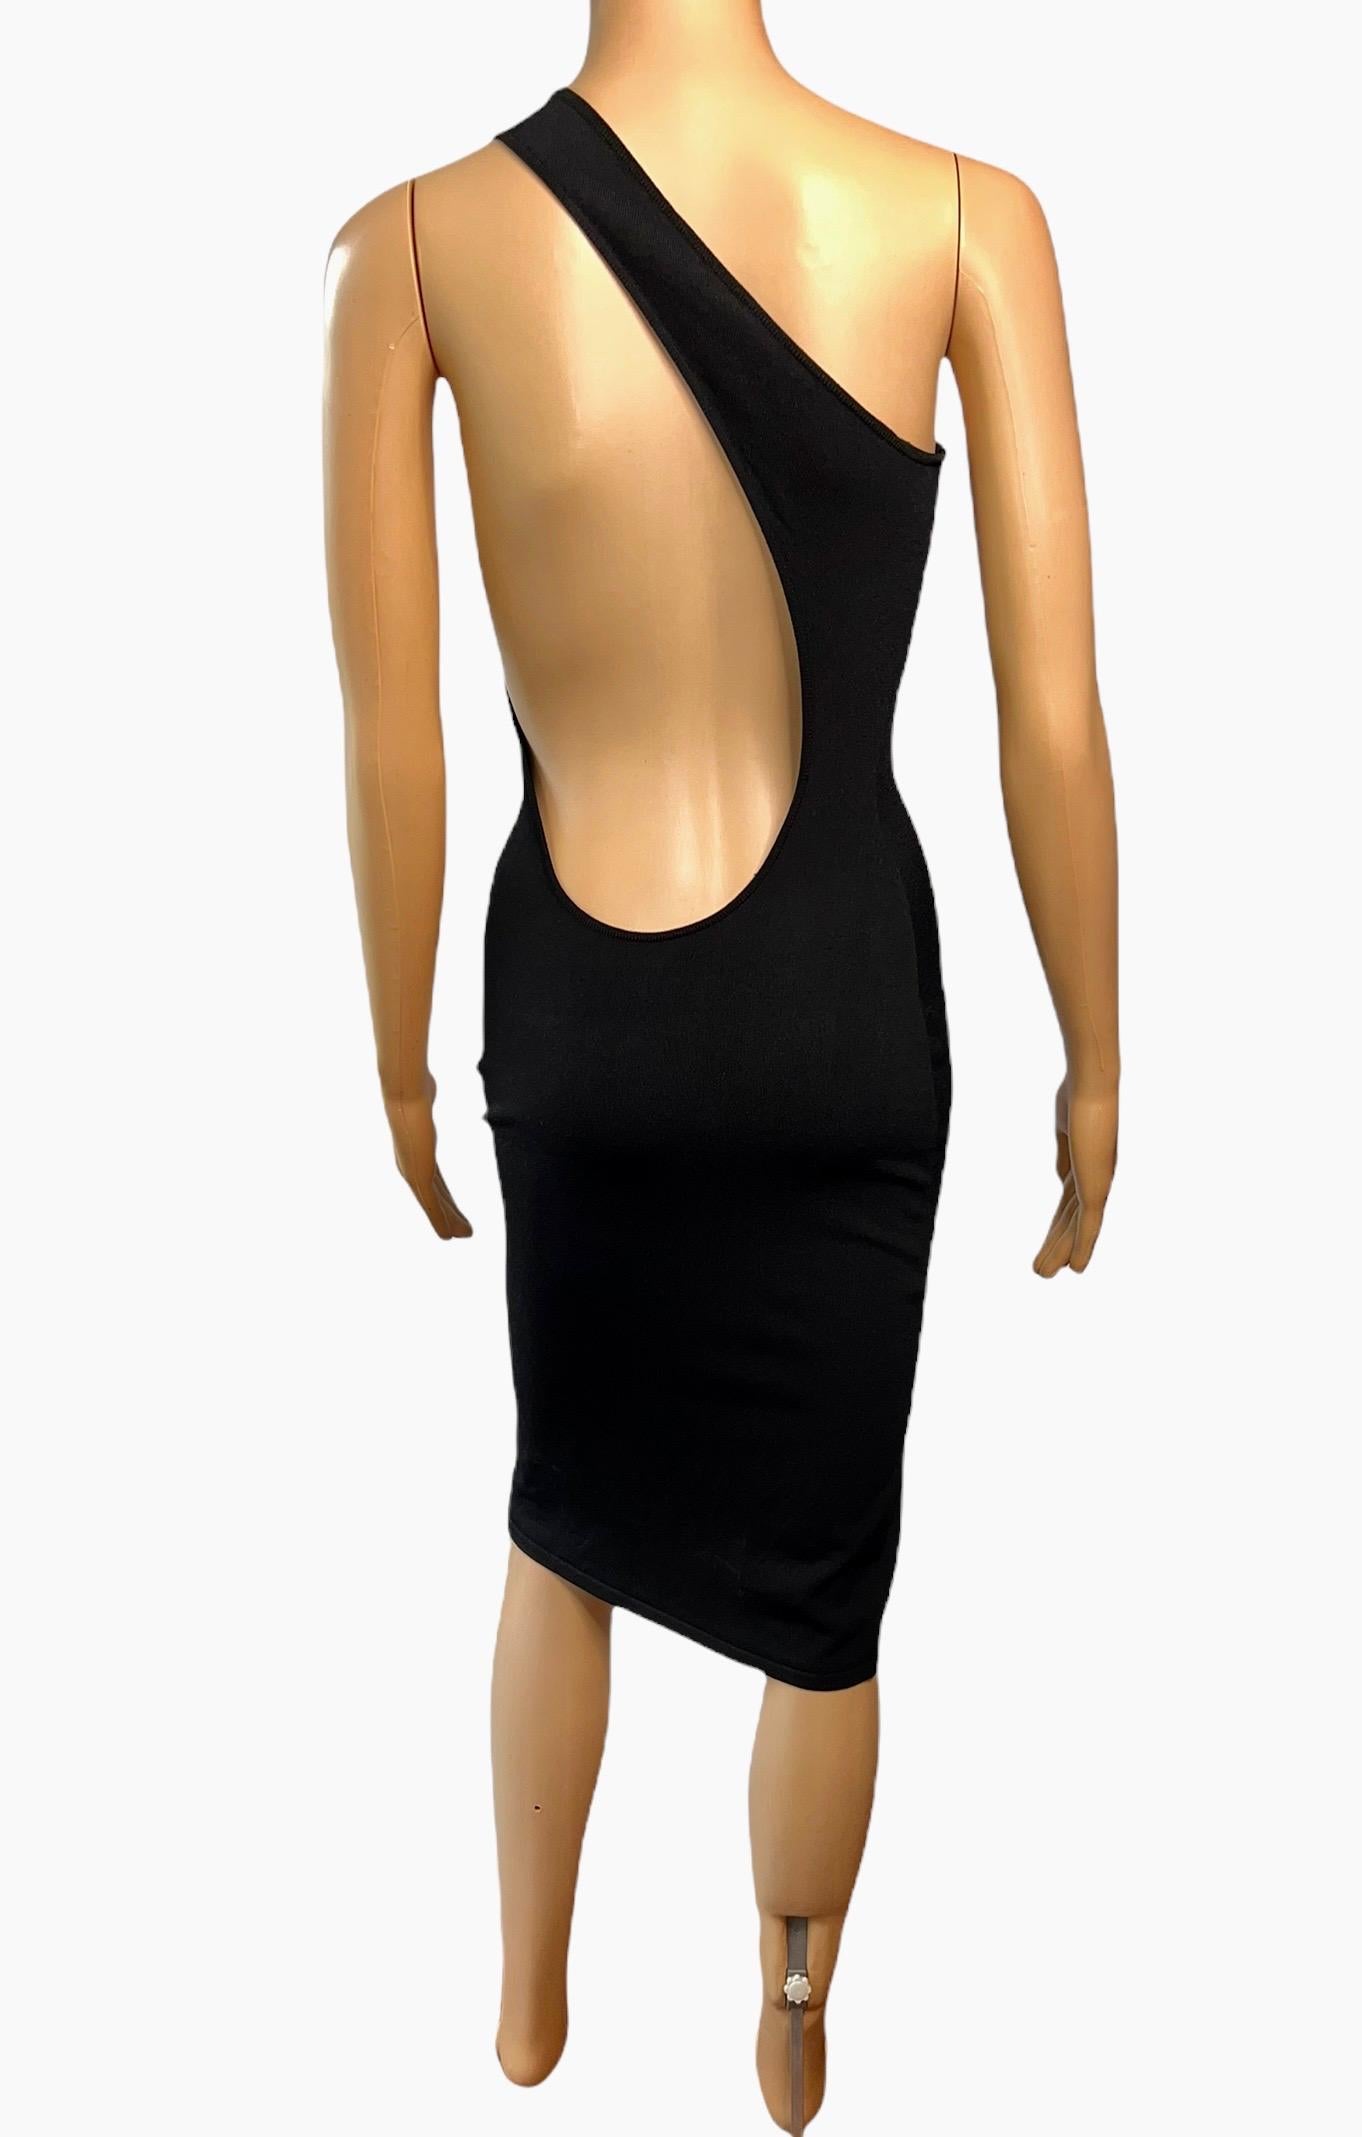 Tom Ford for Gucci S/S 2000 Cutout Bodycon Knit Black Dress In Good Condition For Sale In Naples, FL